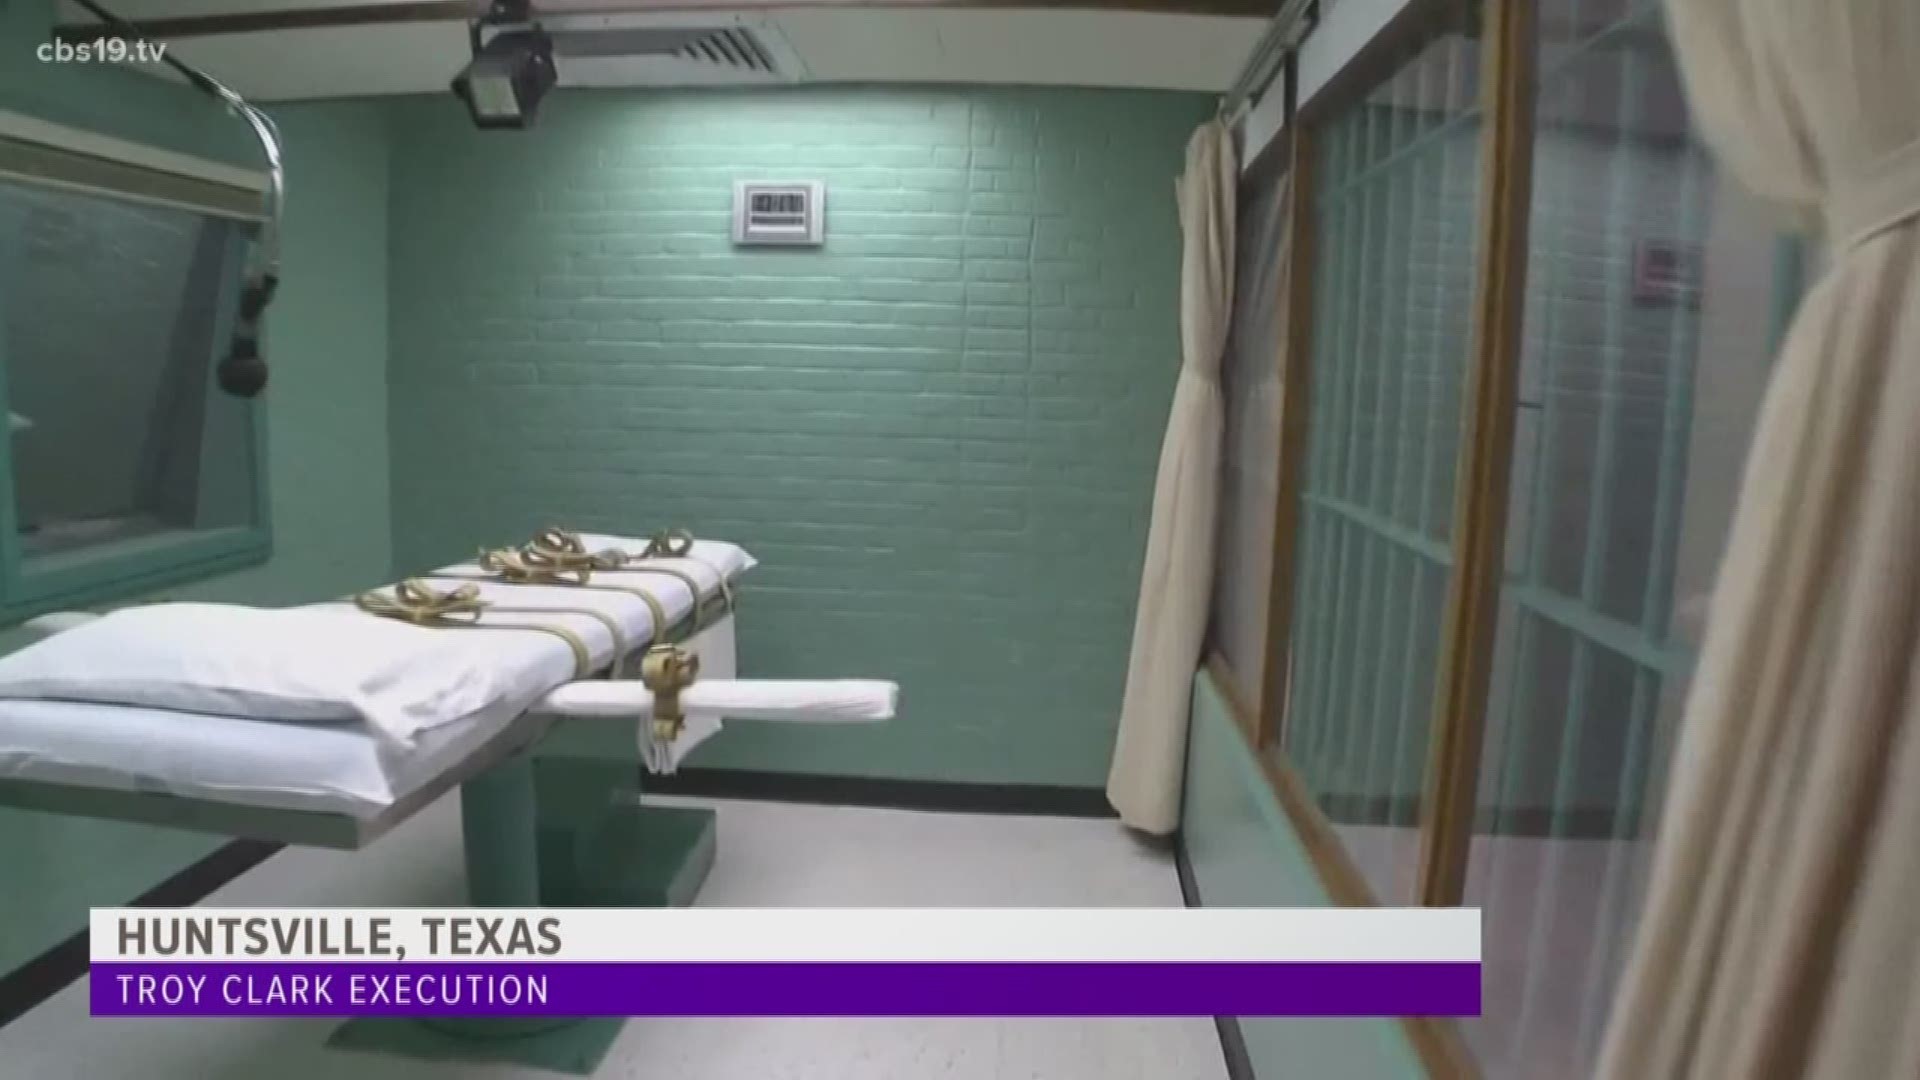 At 6 p.m., convicted killer Troy Clark will be led from a holding cell into the execution chamber in Huntsville.